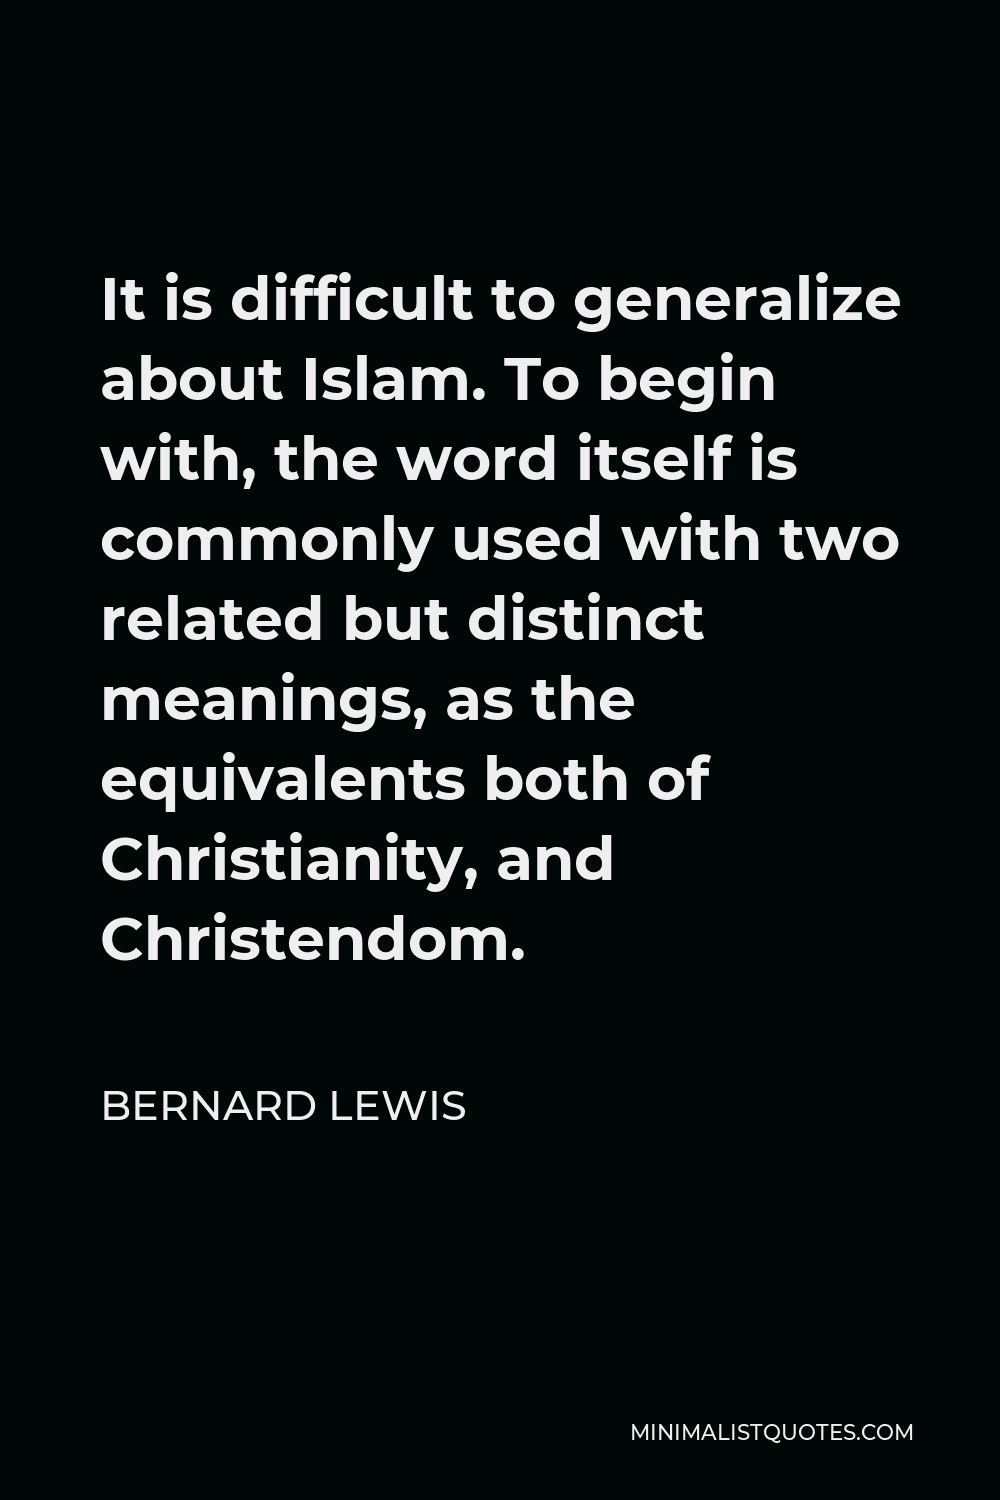 Bernard Lewis Quote - It is difficult to generalize about Islam. To begin with, the word itself is commonly used with two related but distinct meanings, as the equivalents both of Christianity, and Christendom.